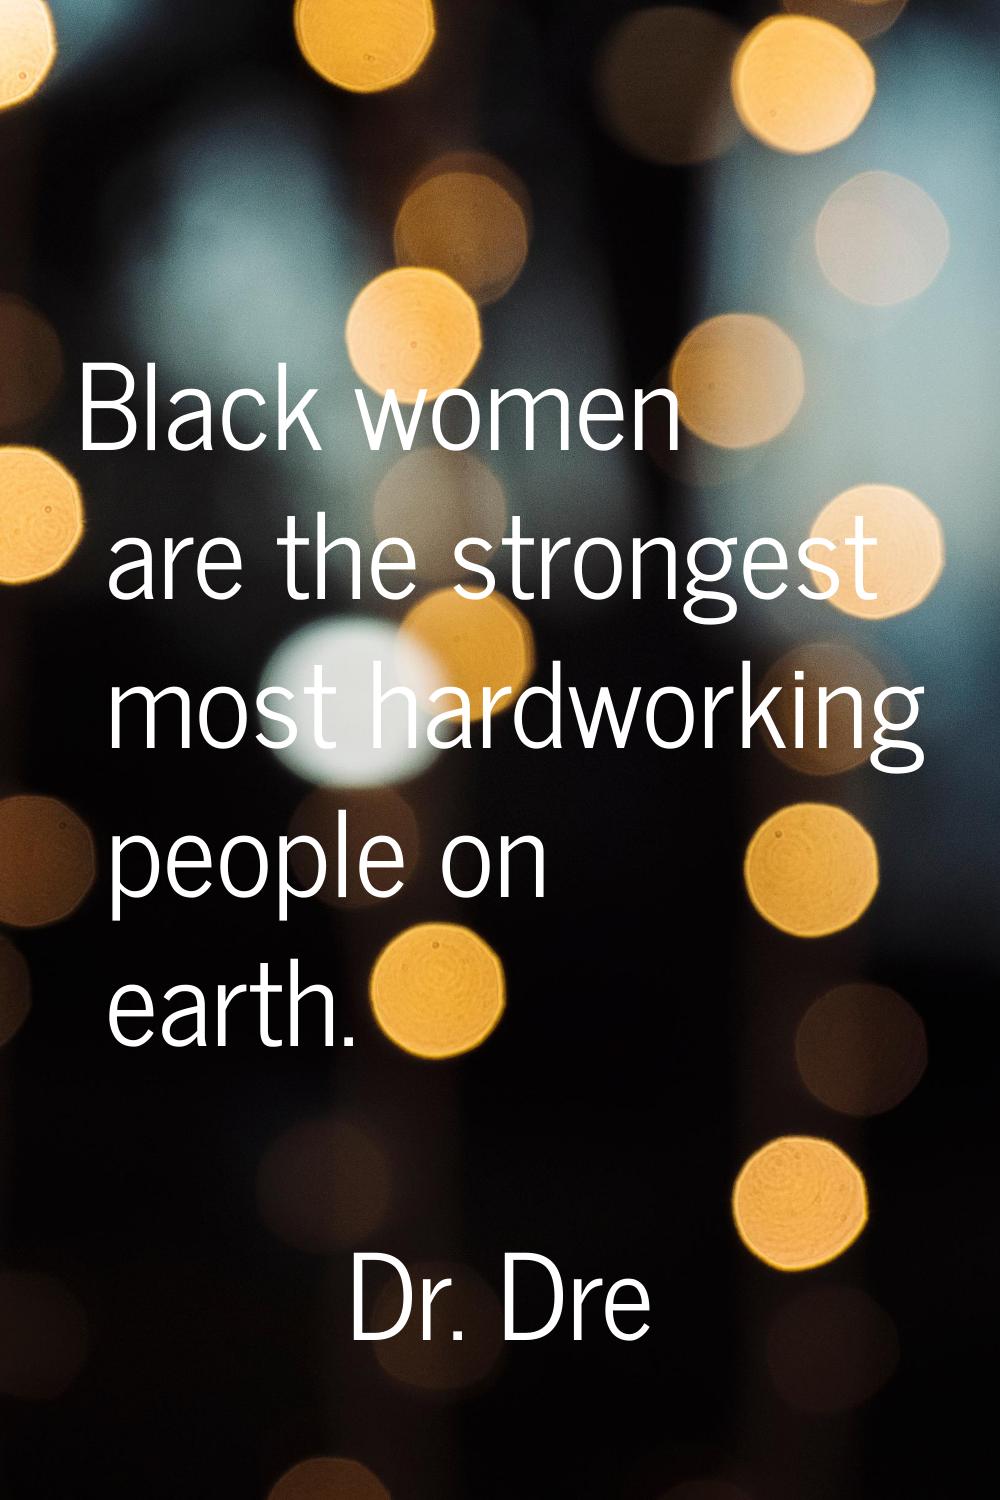 Black women are the strongest most hardworking people on earth.